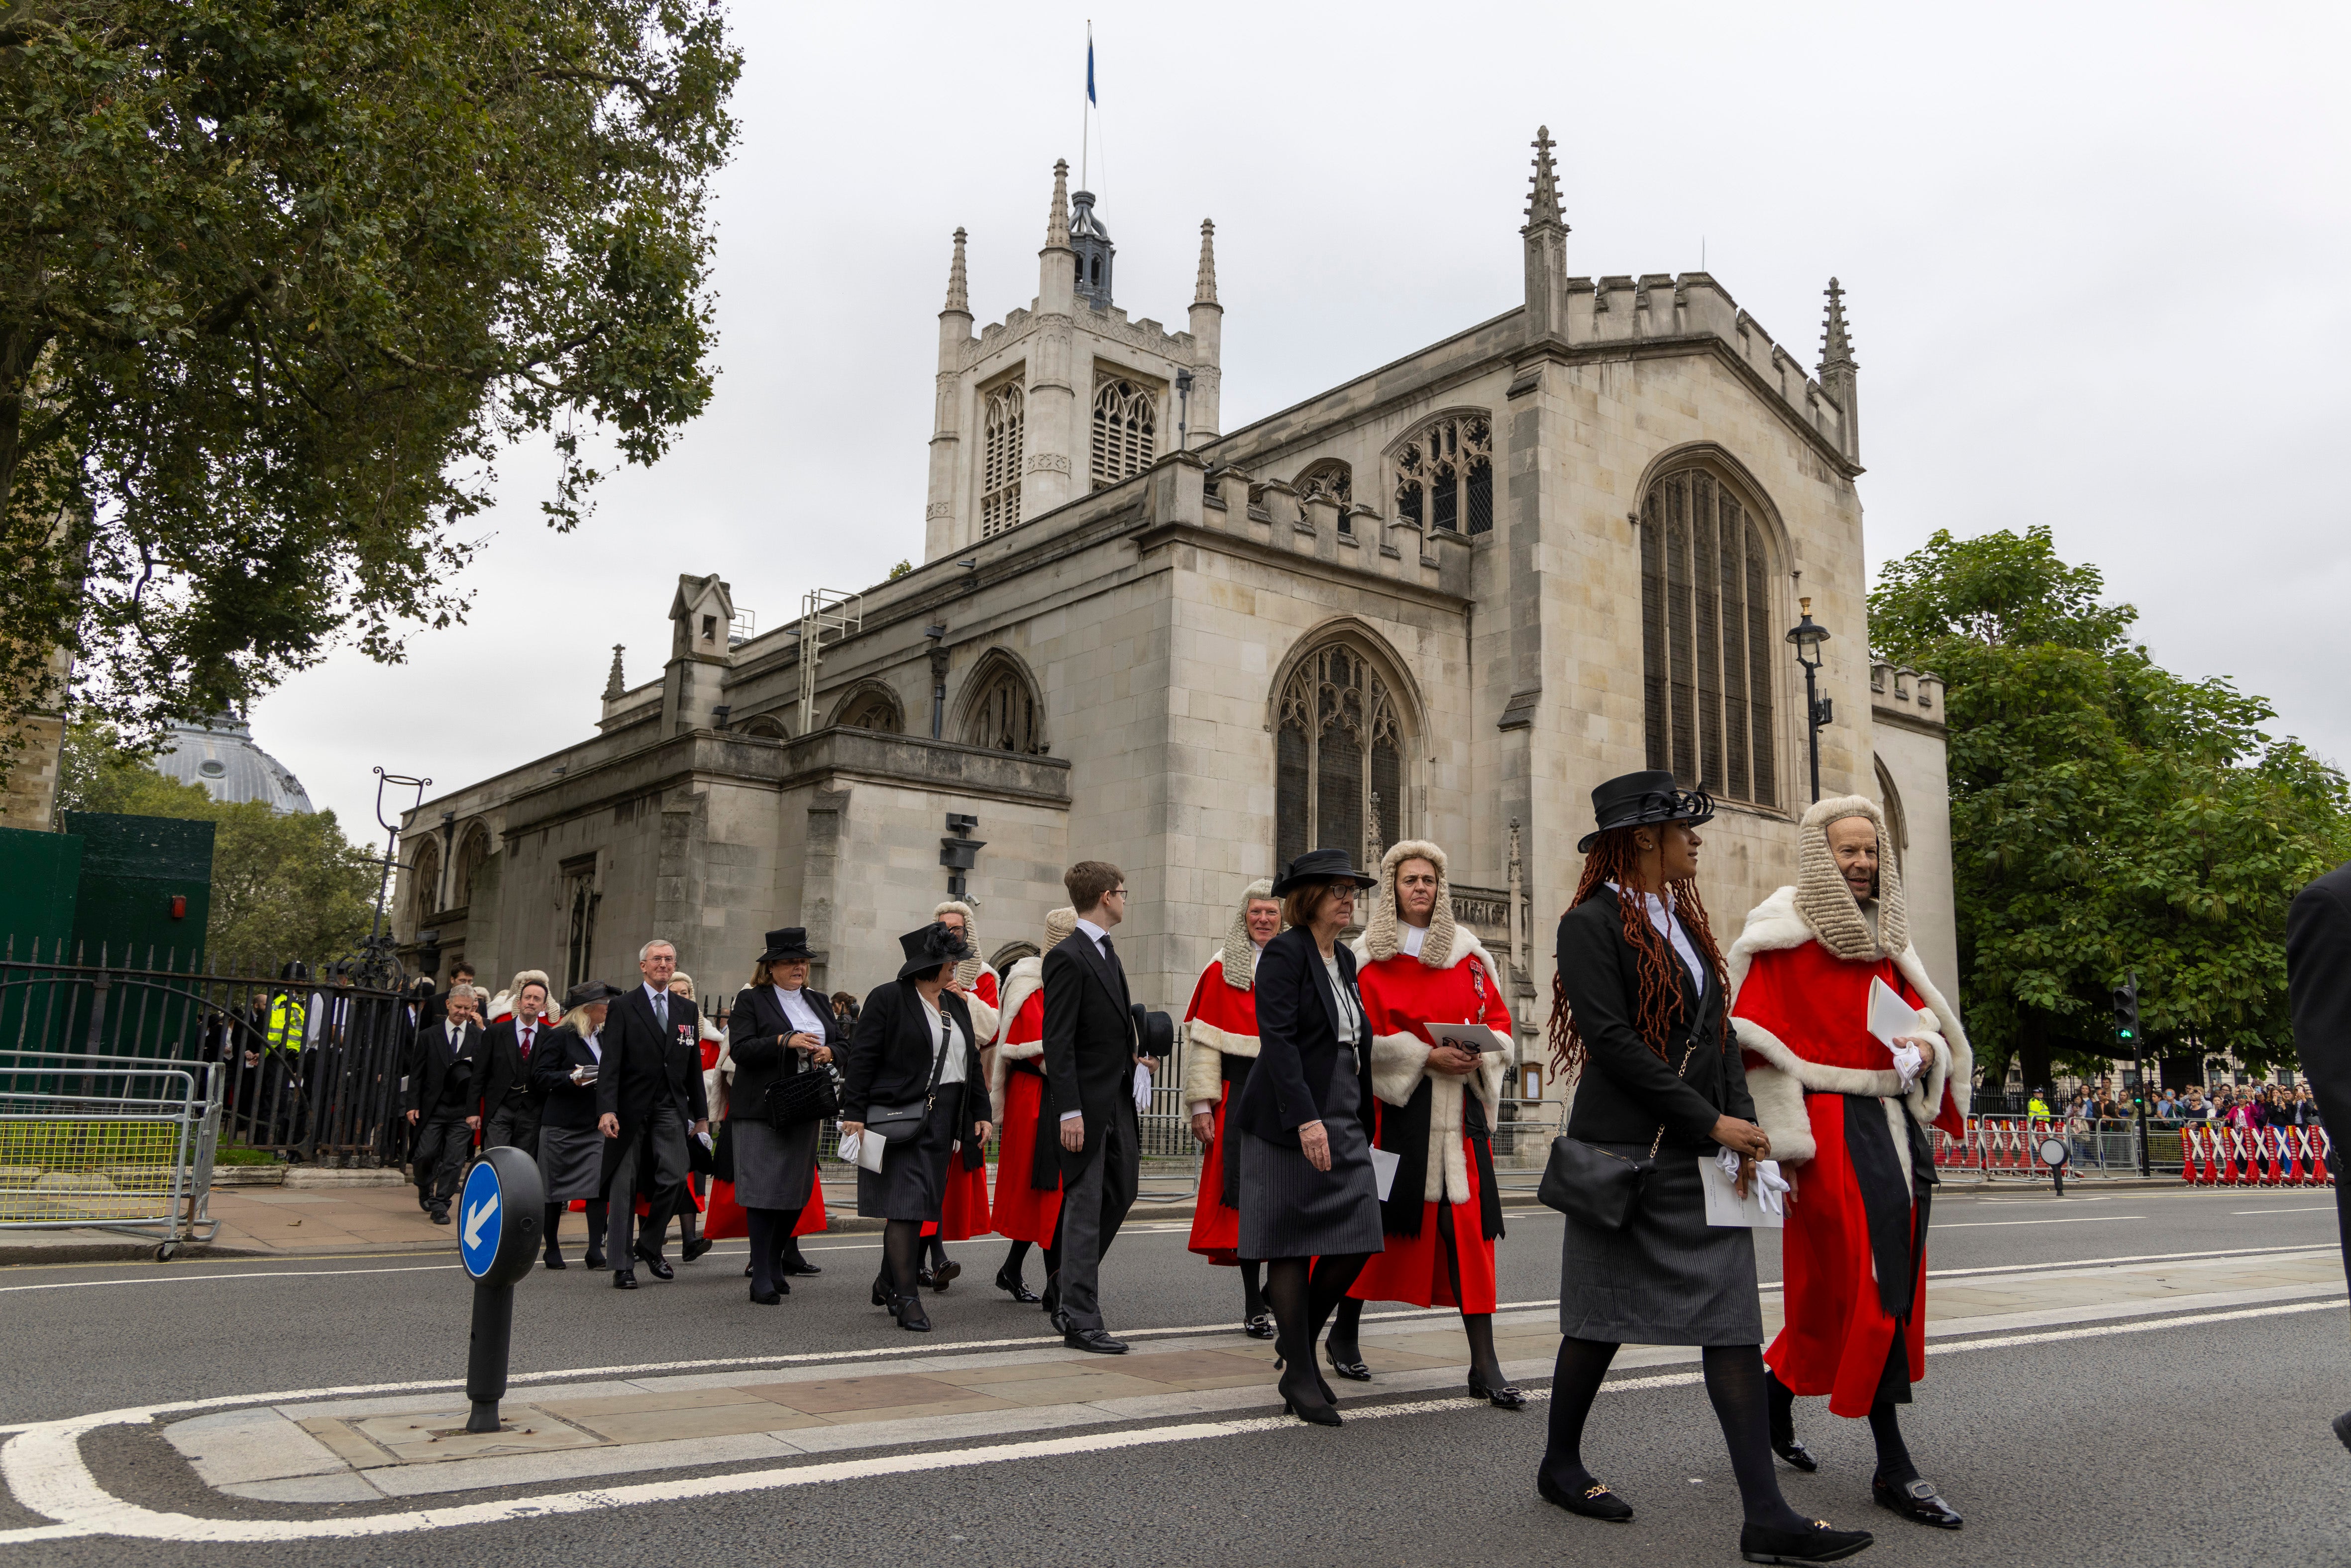 Judges in England, Wales approved for limited, cautious AI use: 'Can't hold back the floodgates'